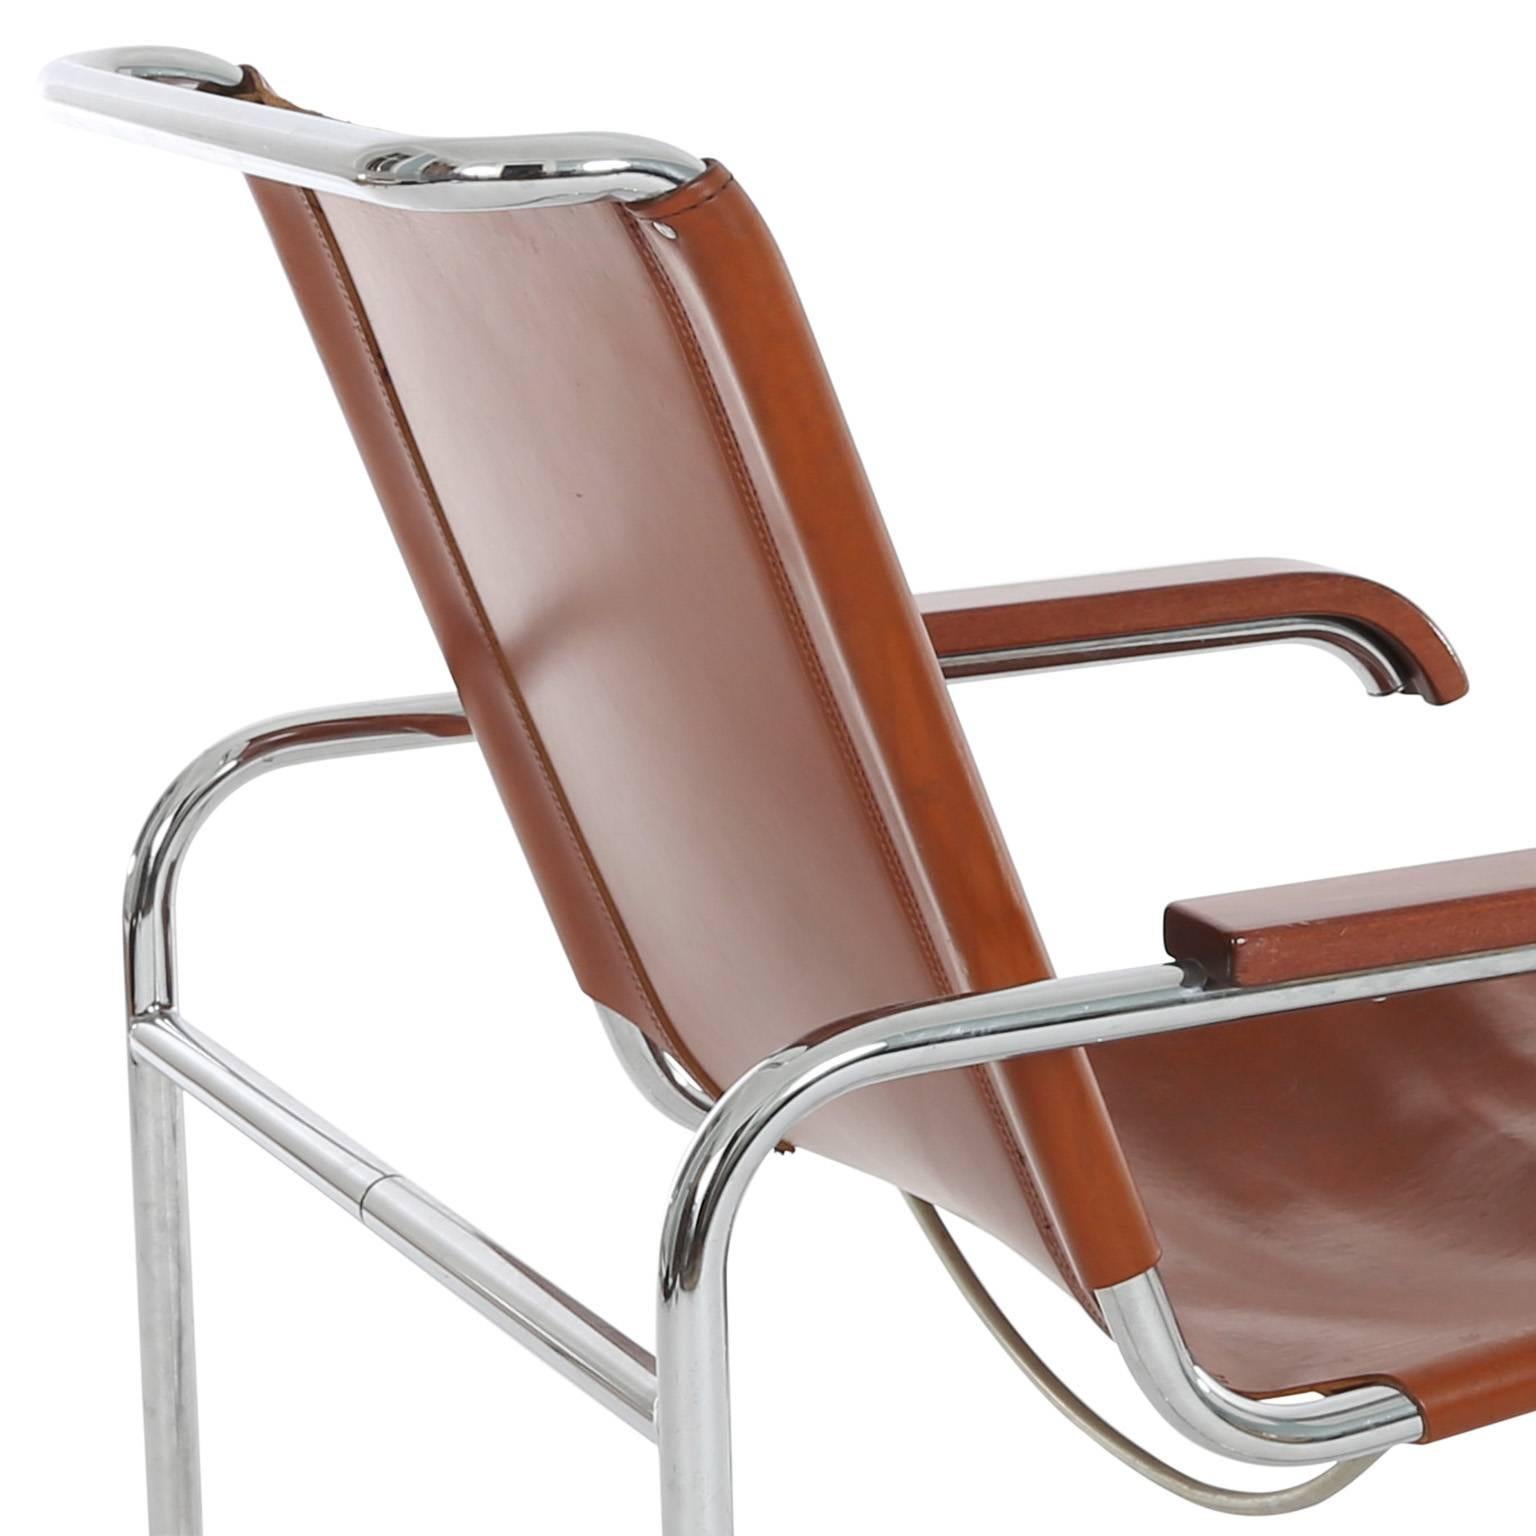 S35 lounge chair designed by Marcel Breuer in 1928 and manufactured in the 1980s by Thonet (marked). The starting point for the design was a chair with a “floating” seat, therefore the chair has a frame made out of one piece. This construction also